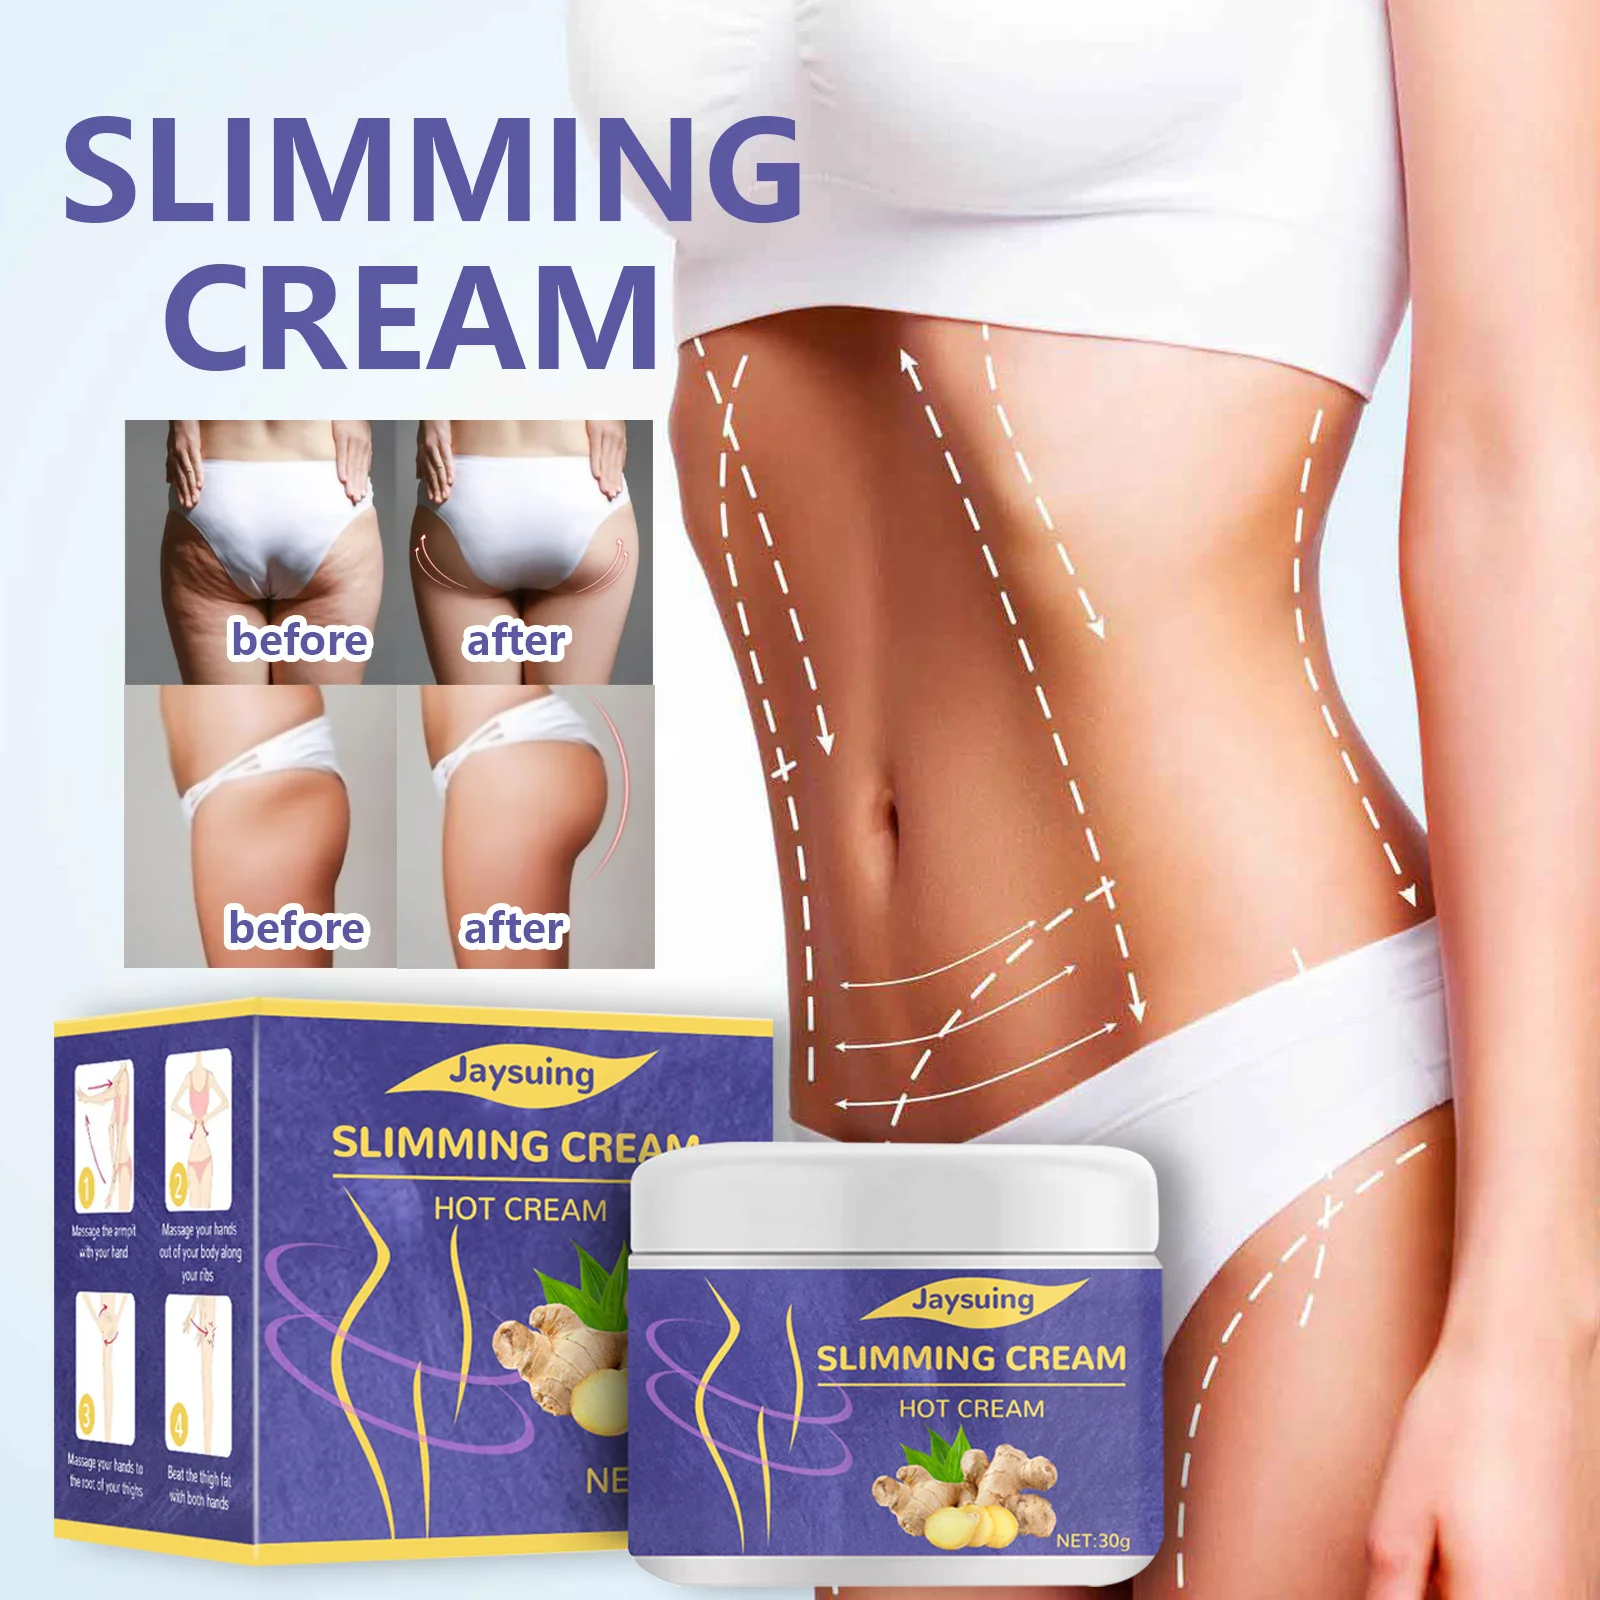 

Effective Slimming Cream Remove Cellulite Sculpting Weight Loss Lifting Firming Fat Burning Massage Shaping Body Care Products